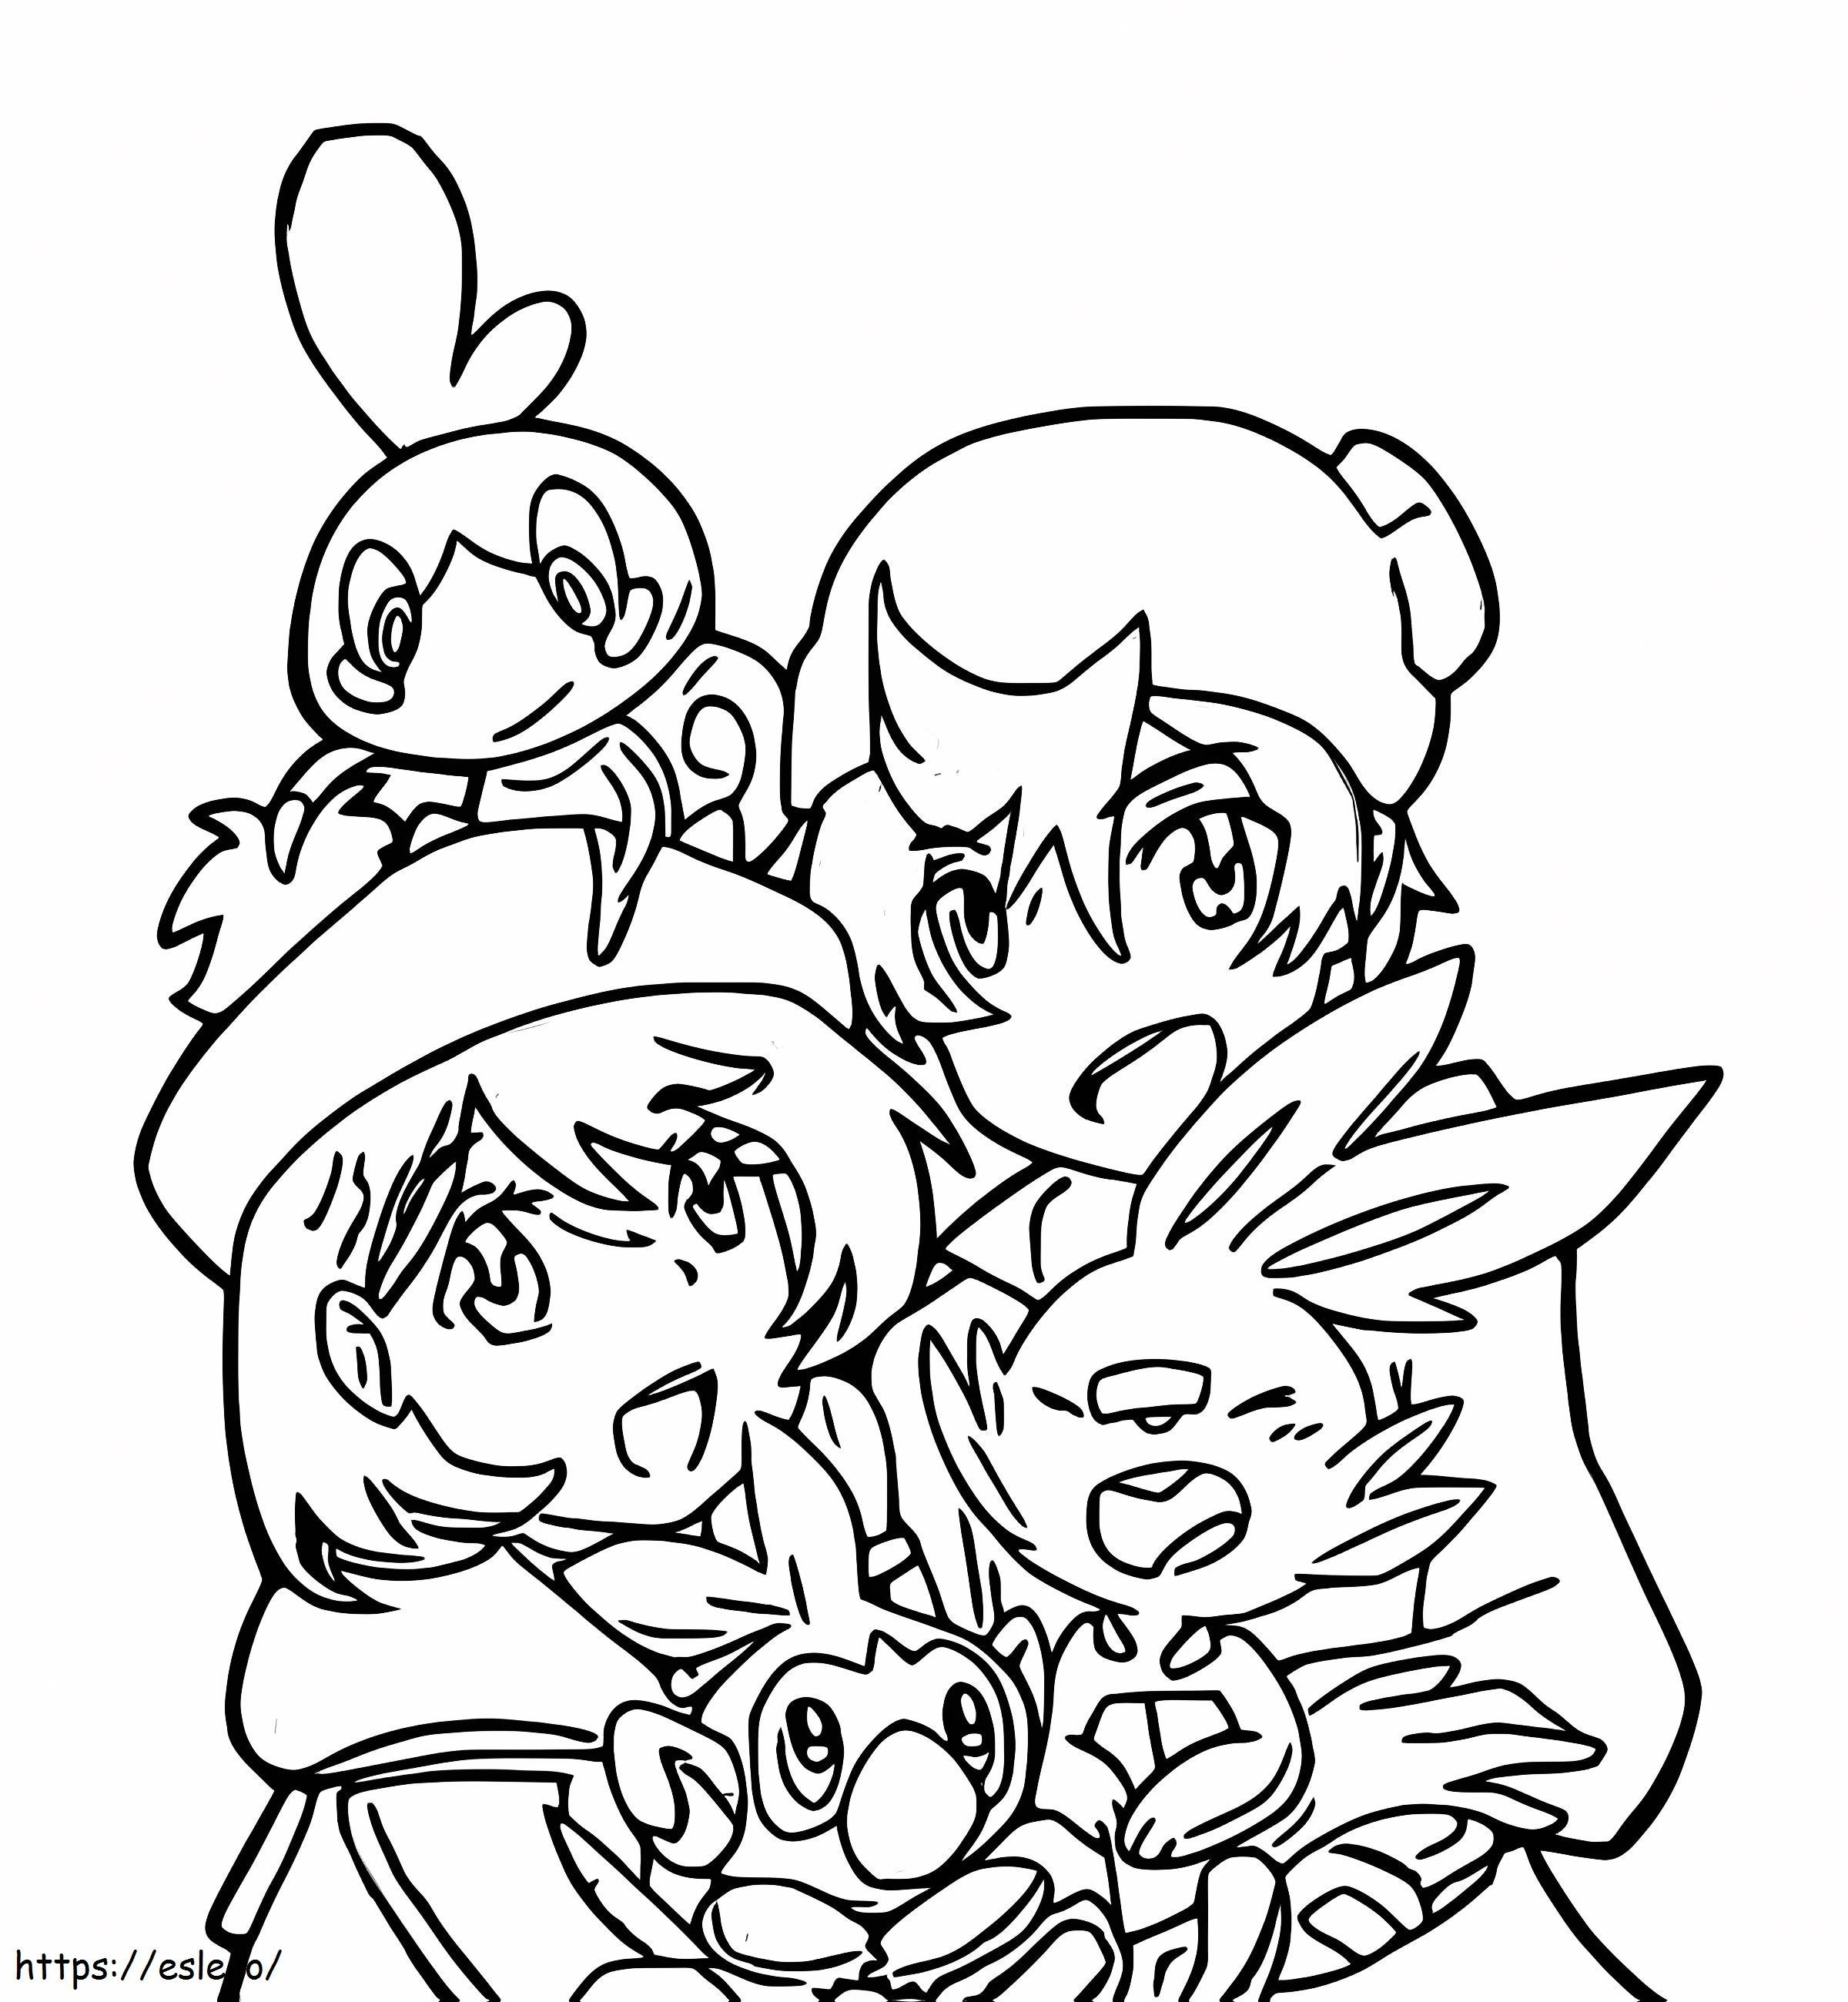 Grookey 6 coloring page